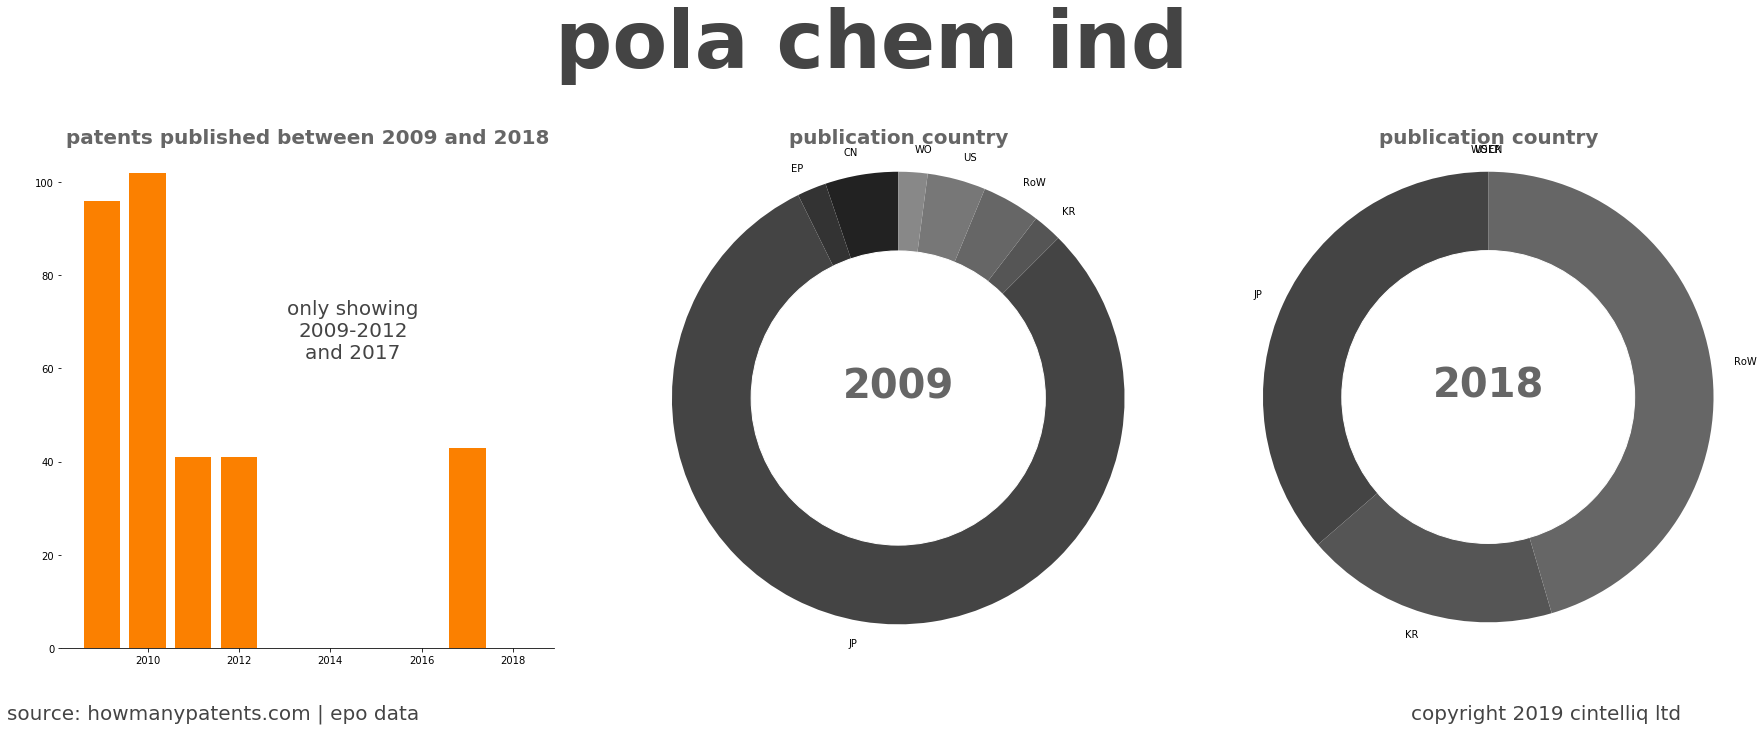 summary of patents for Pola Chem Ind